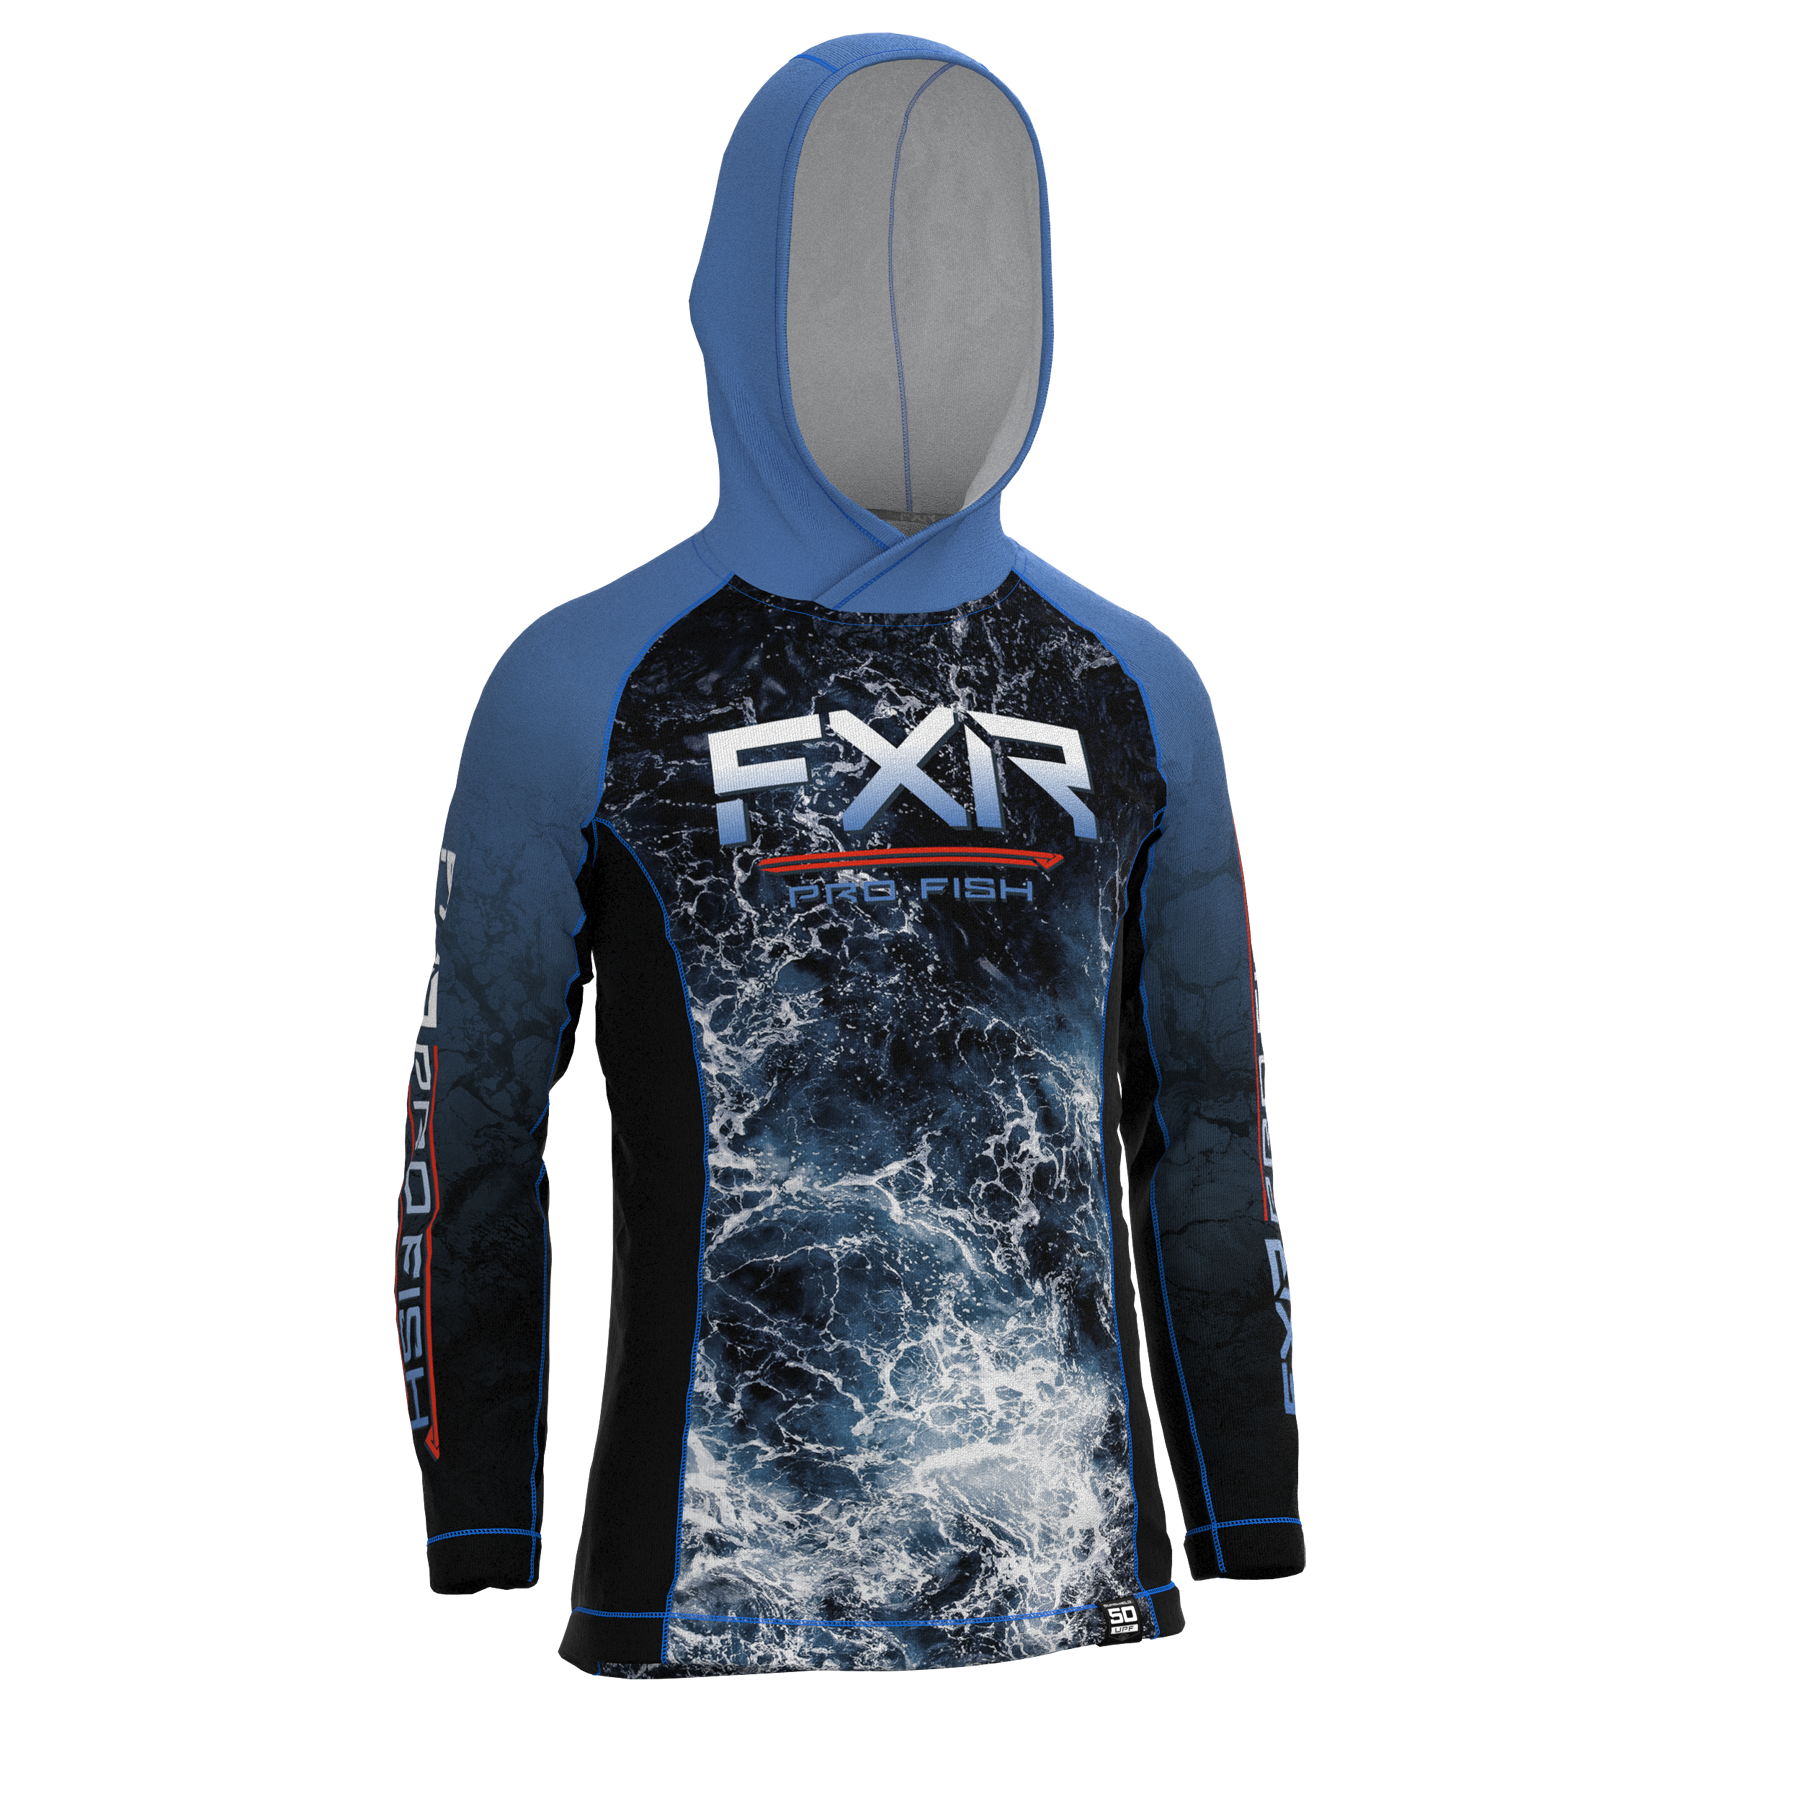 fxr racing hoodies kids for derby upf pullover